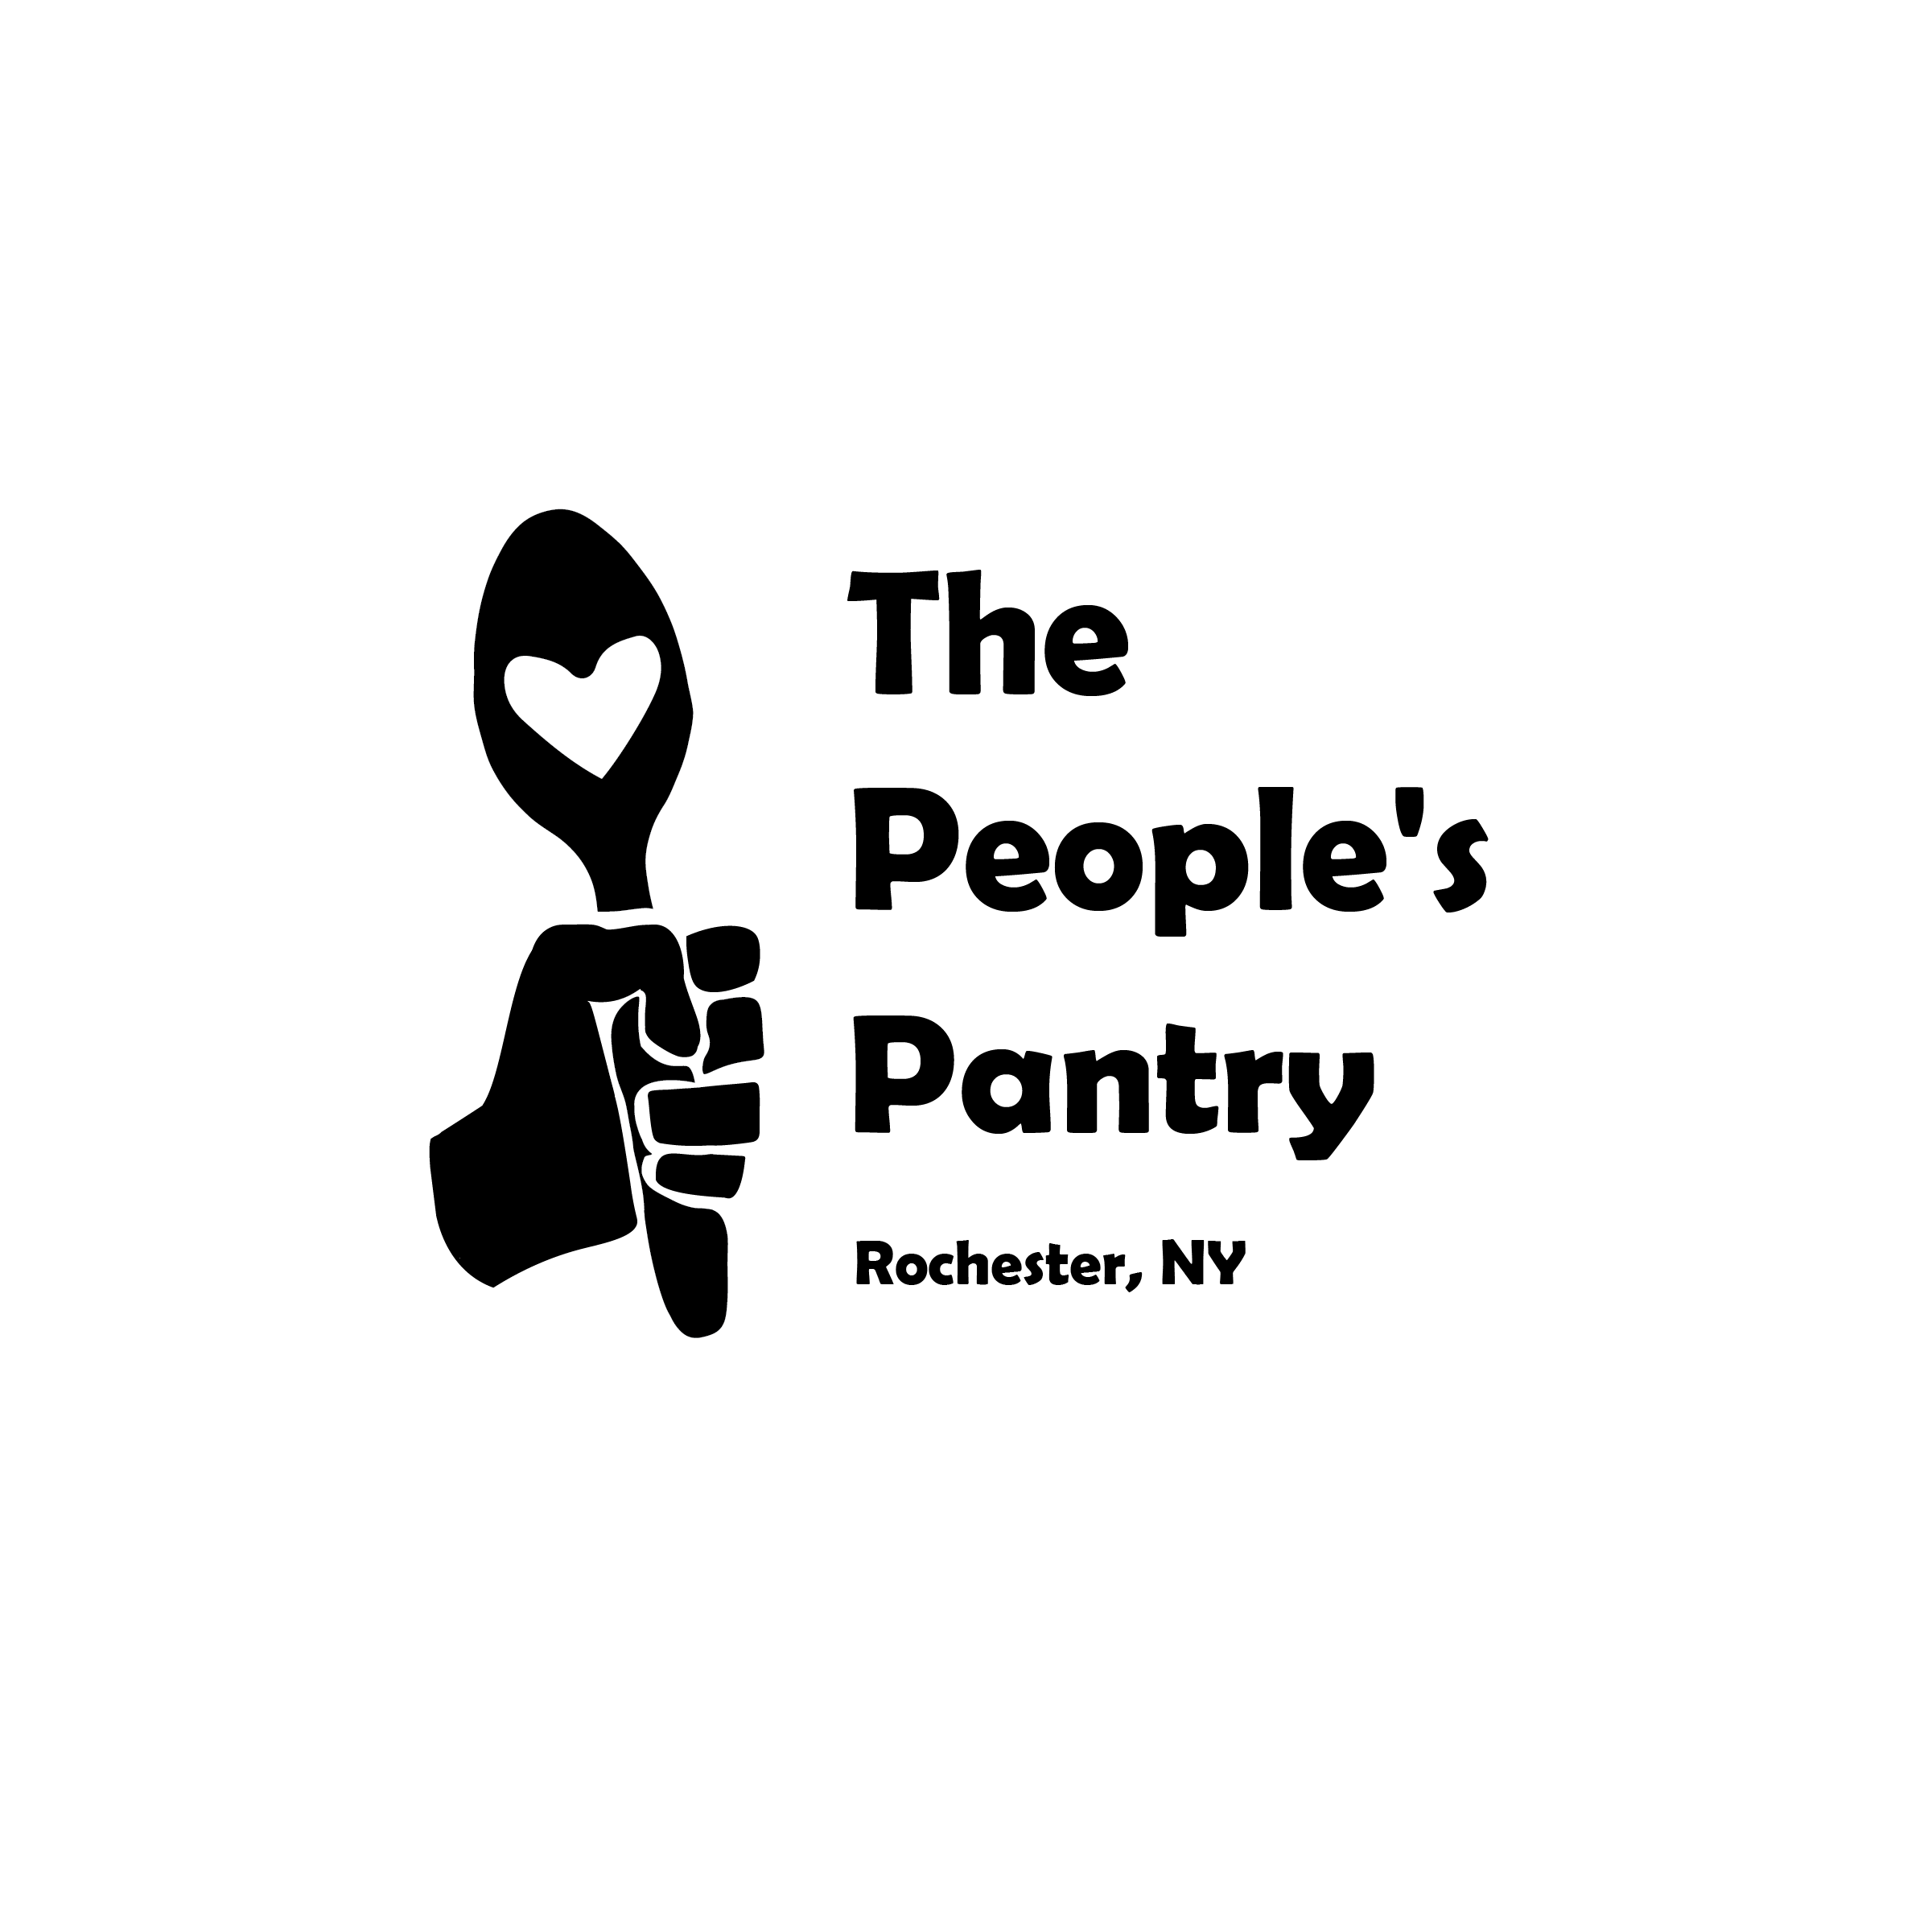 The People's Pantry of Rochester